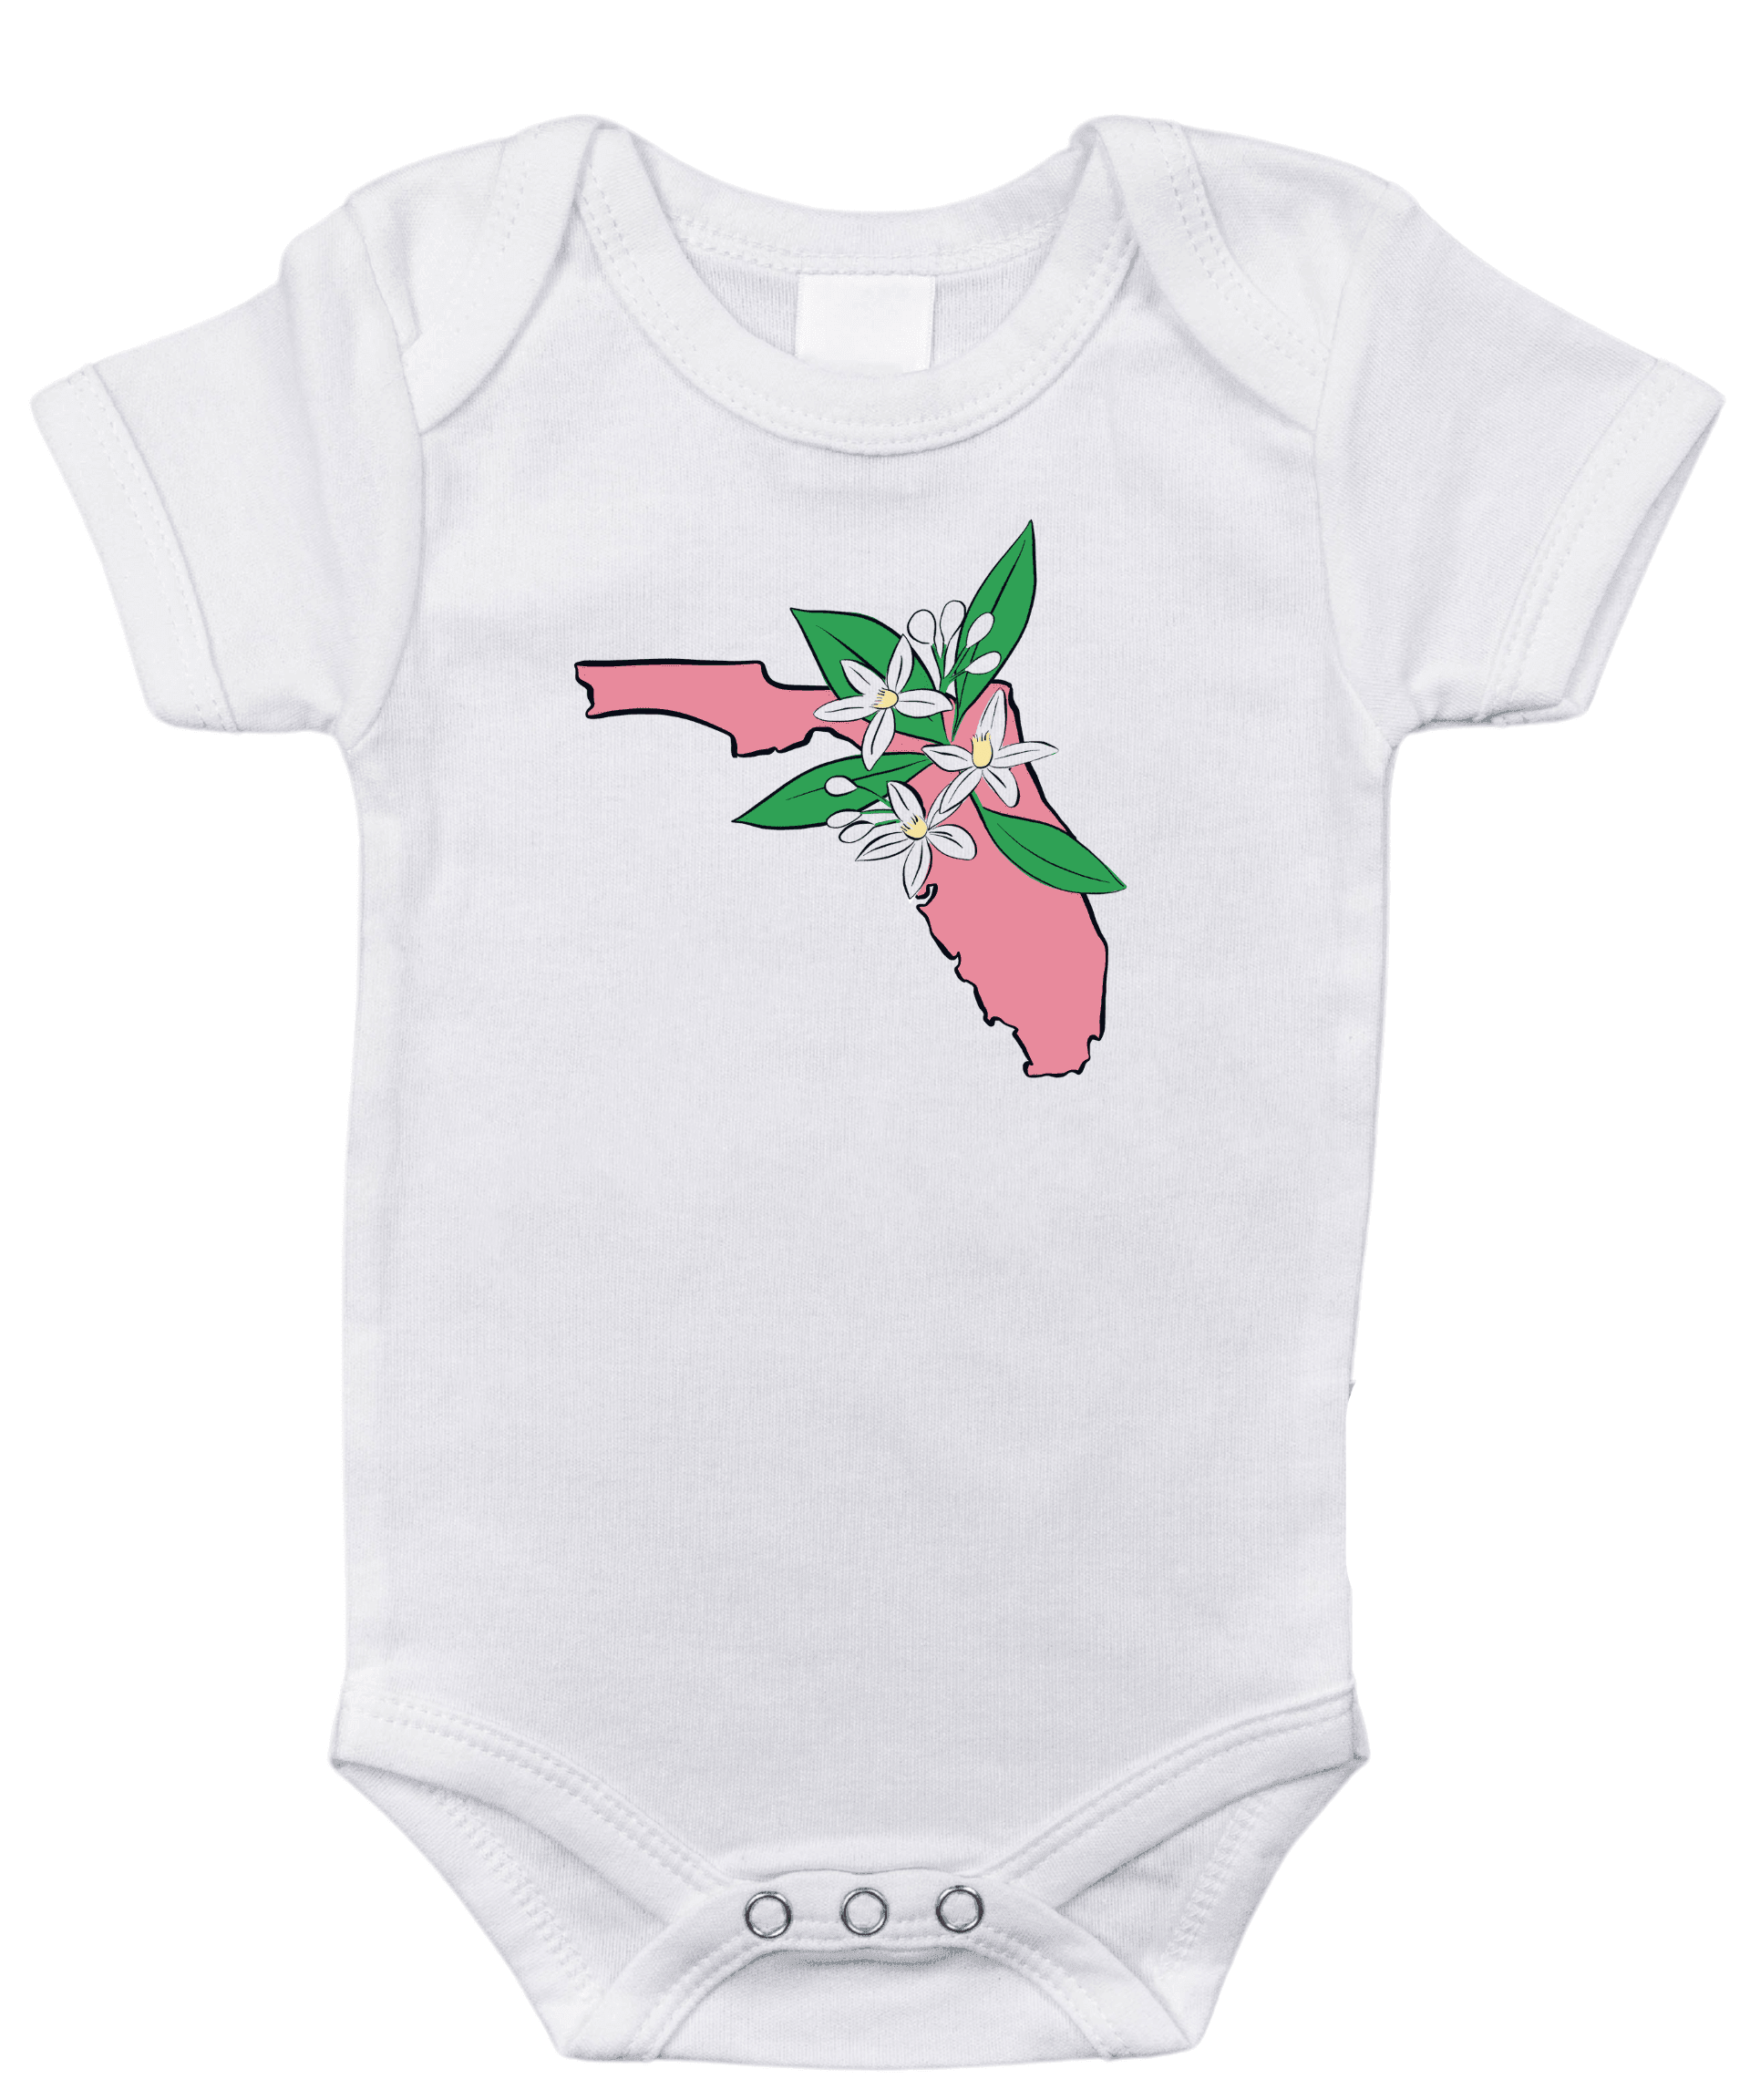 White baby onesie with "Florida Orange Blossom" text and orange blossom graphic, on a plain background.